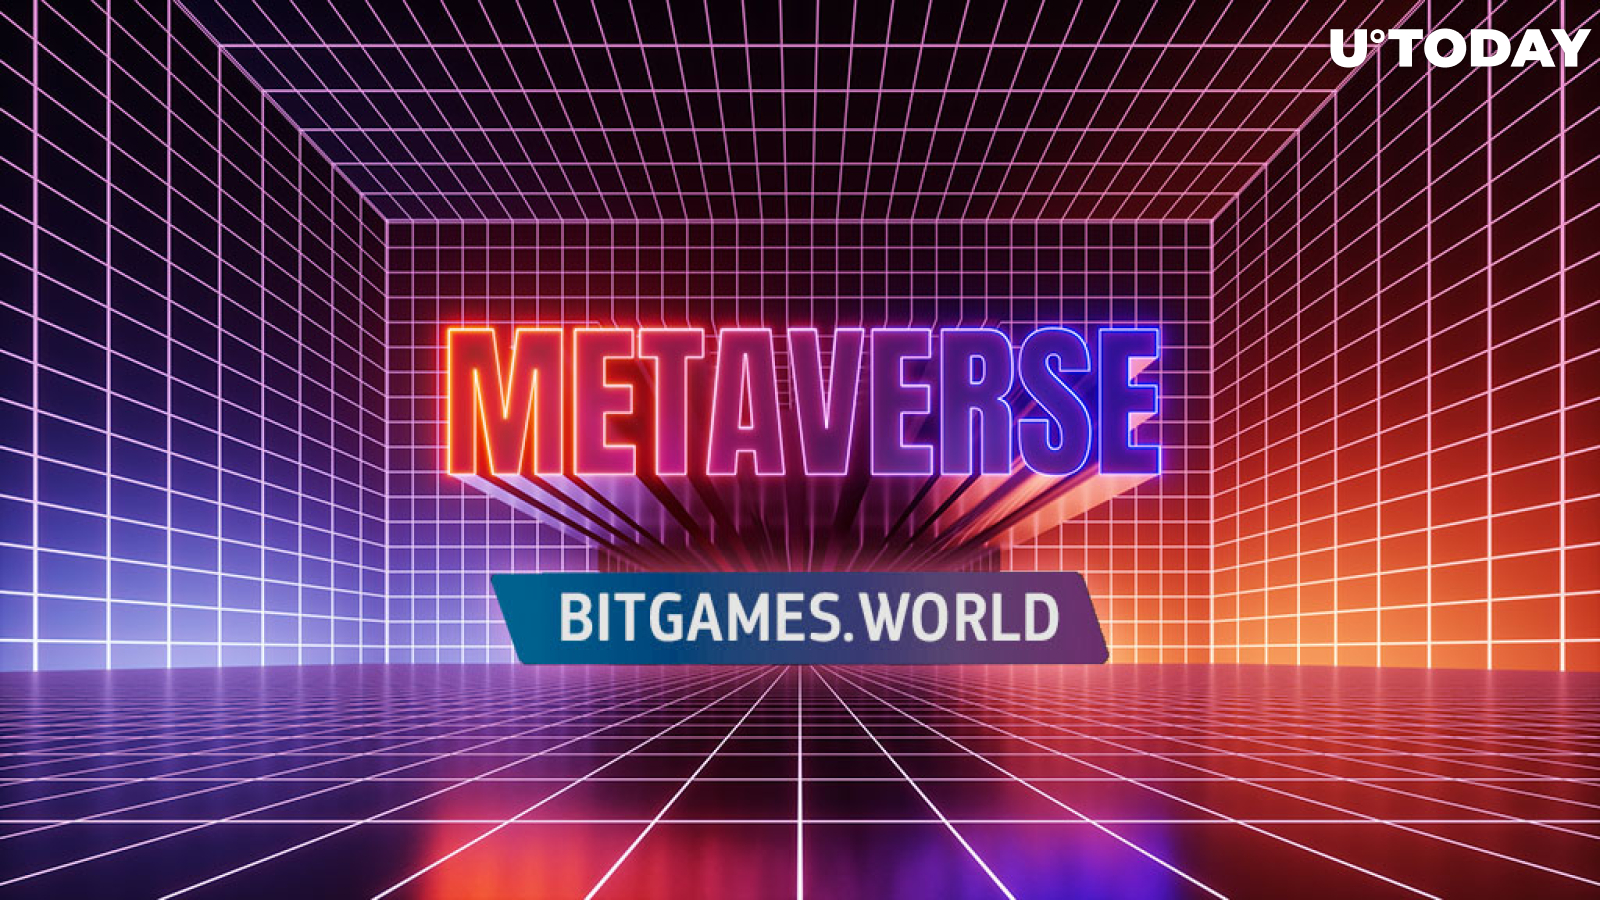 Bitgames.World Provides New Play-to-Earn Experience in Freshly Developed Metaverse